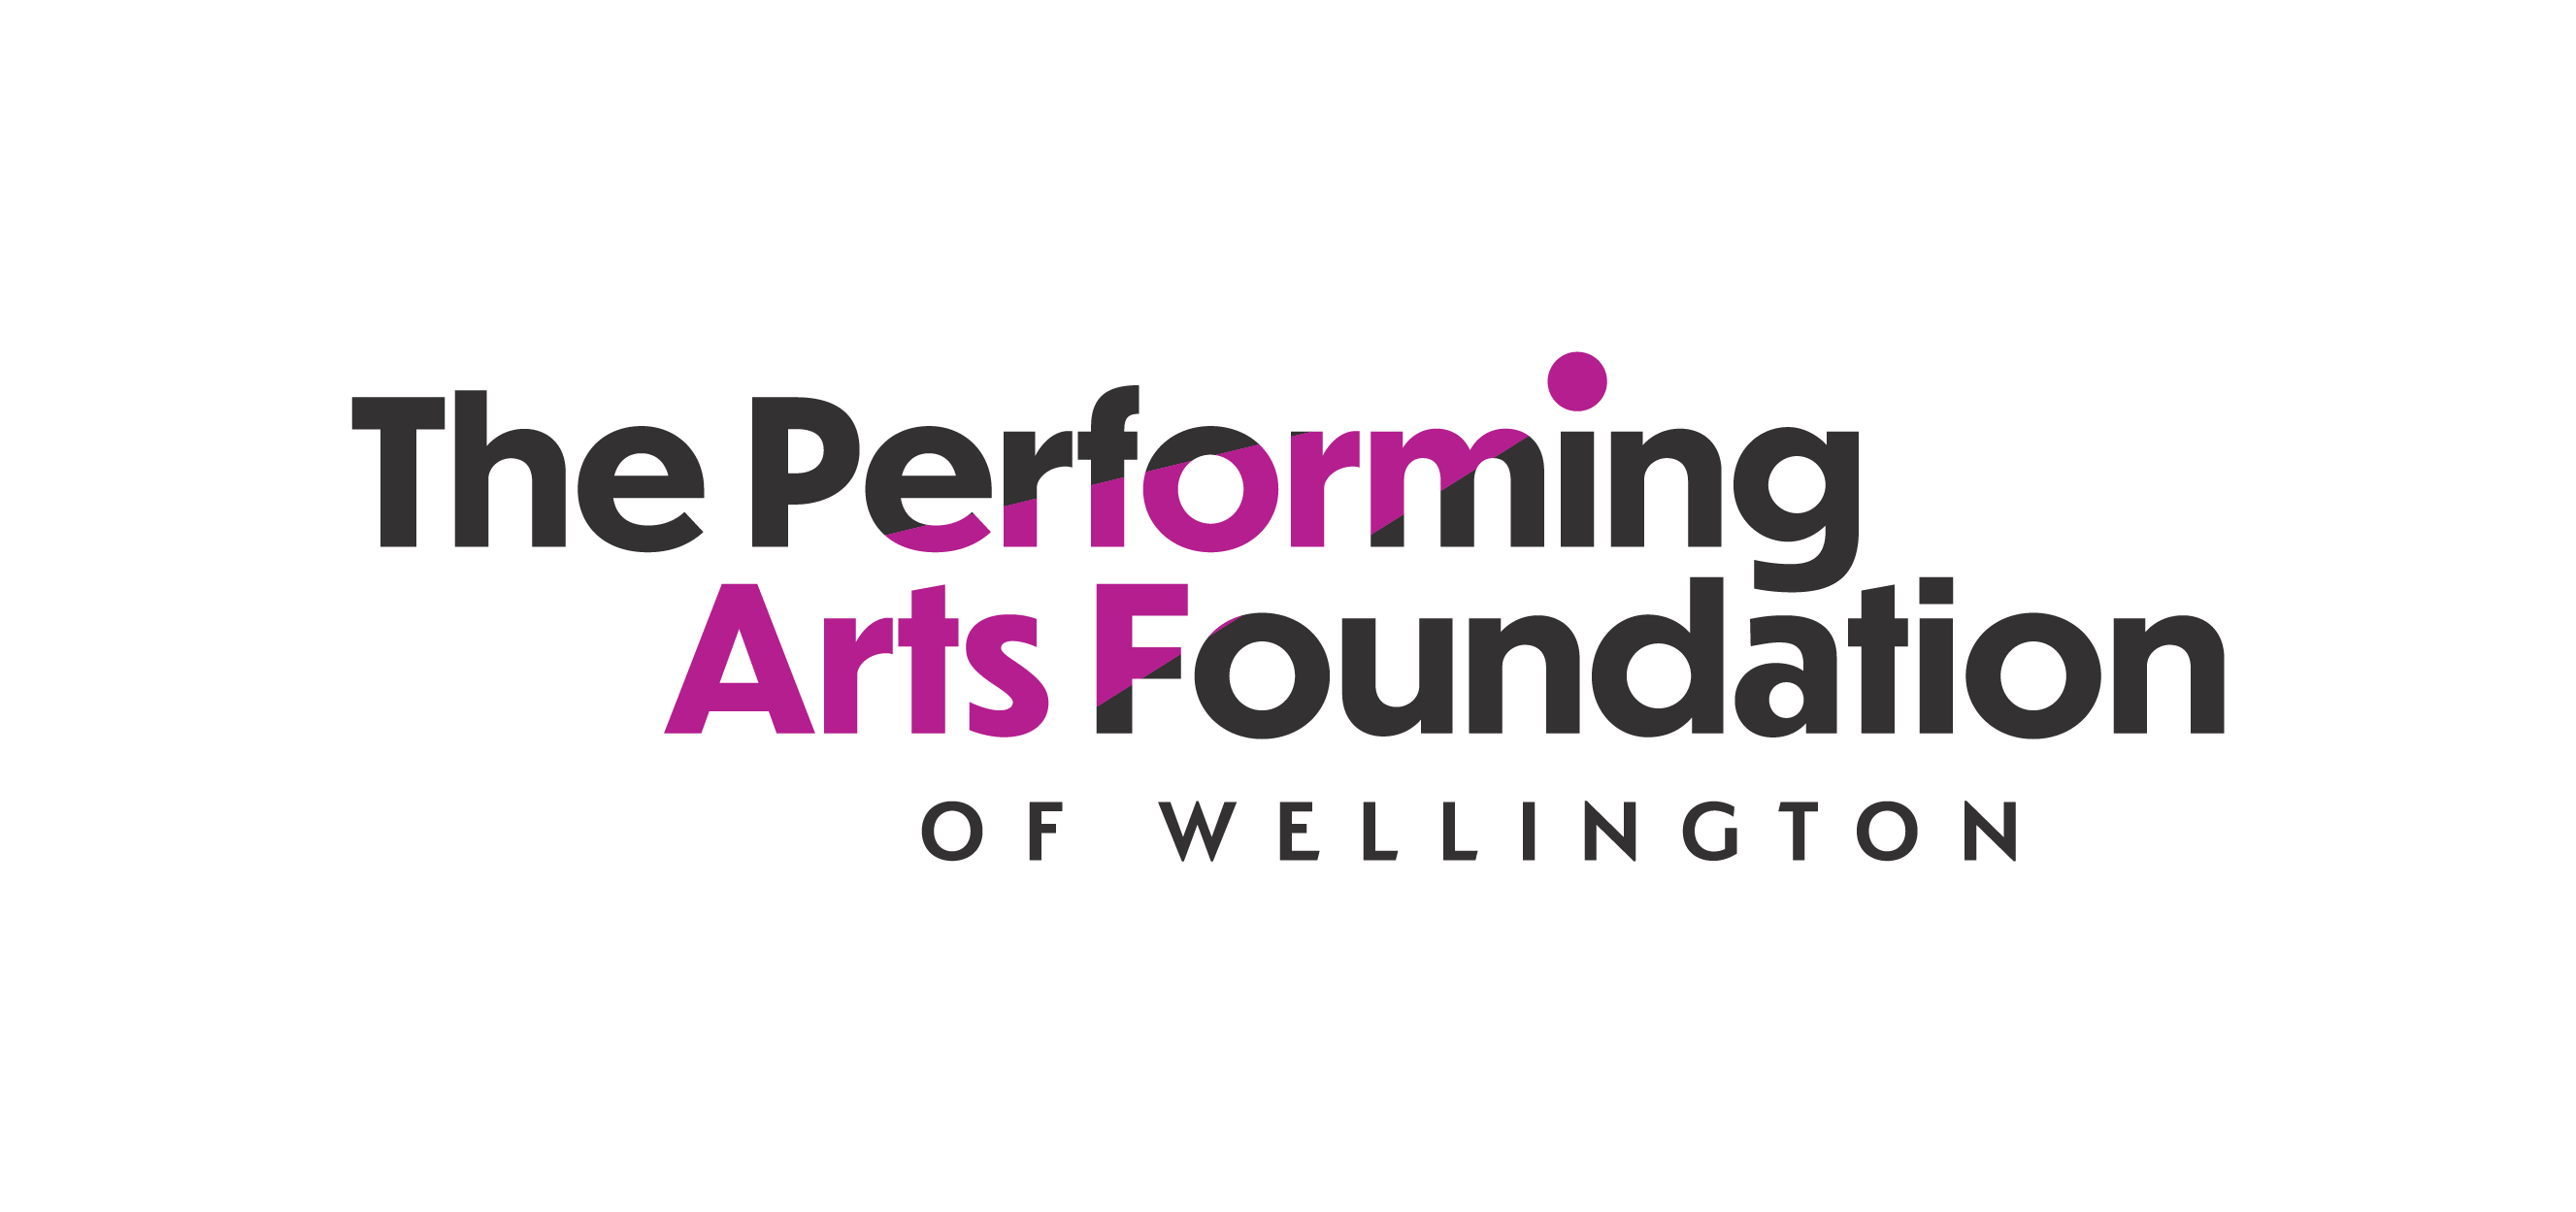 The Performing Arts Foundation